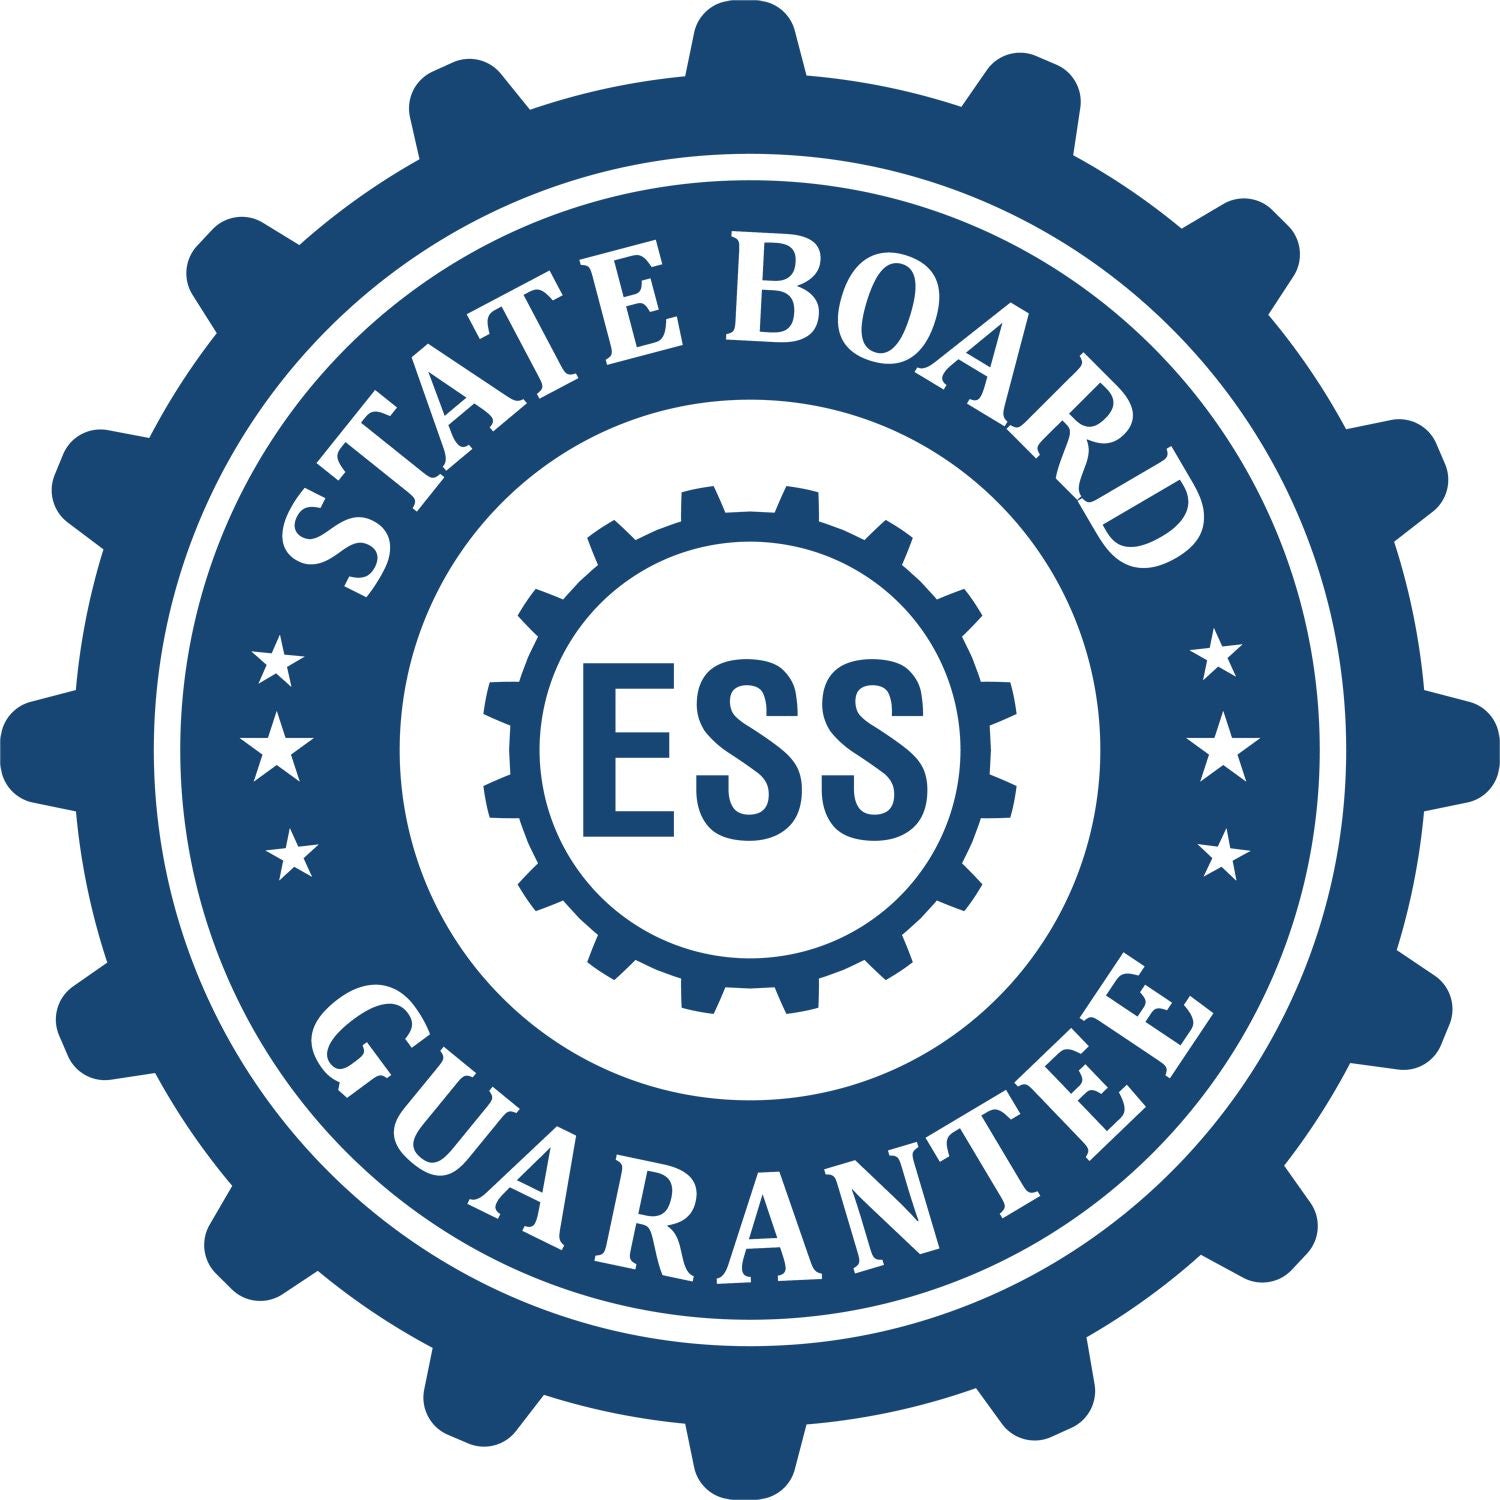 An emblem in a gear shape illustrating a state board guarantee for the Premium MaxLight Pre-Inked Alabama Landscape Architectural Stamp product.